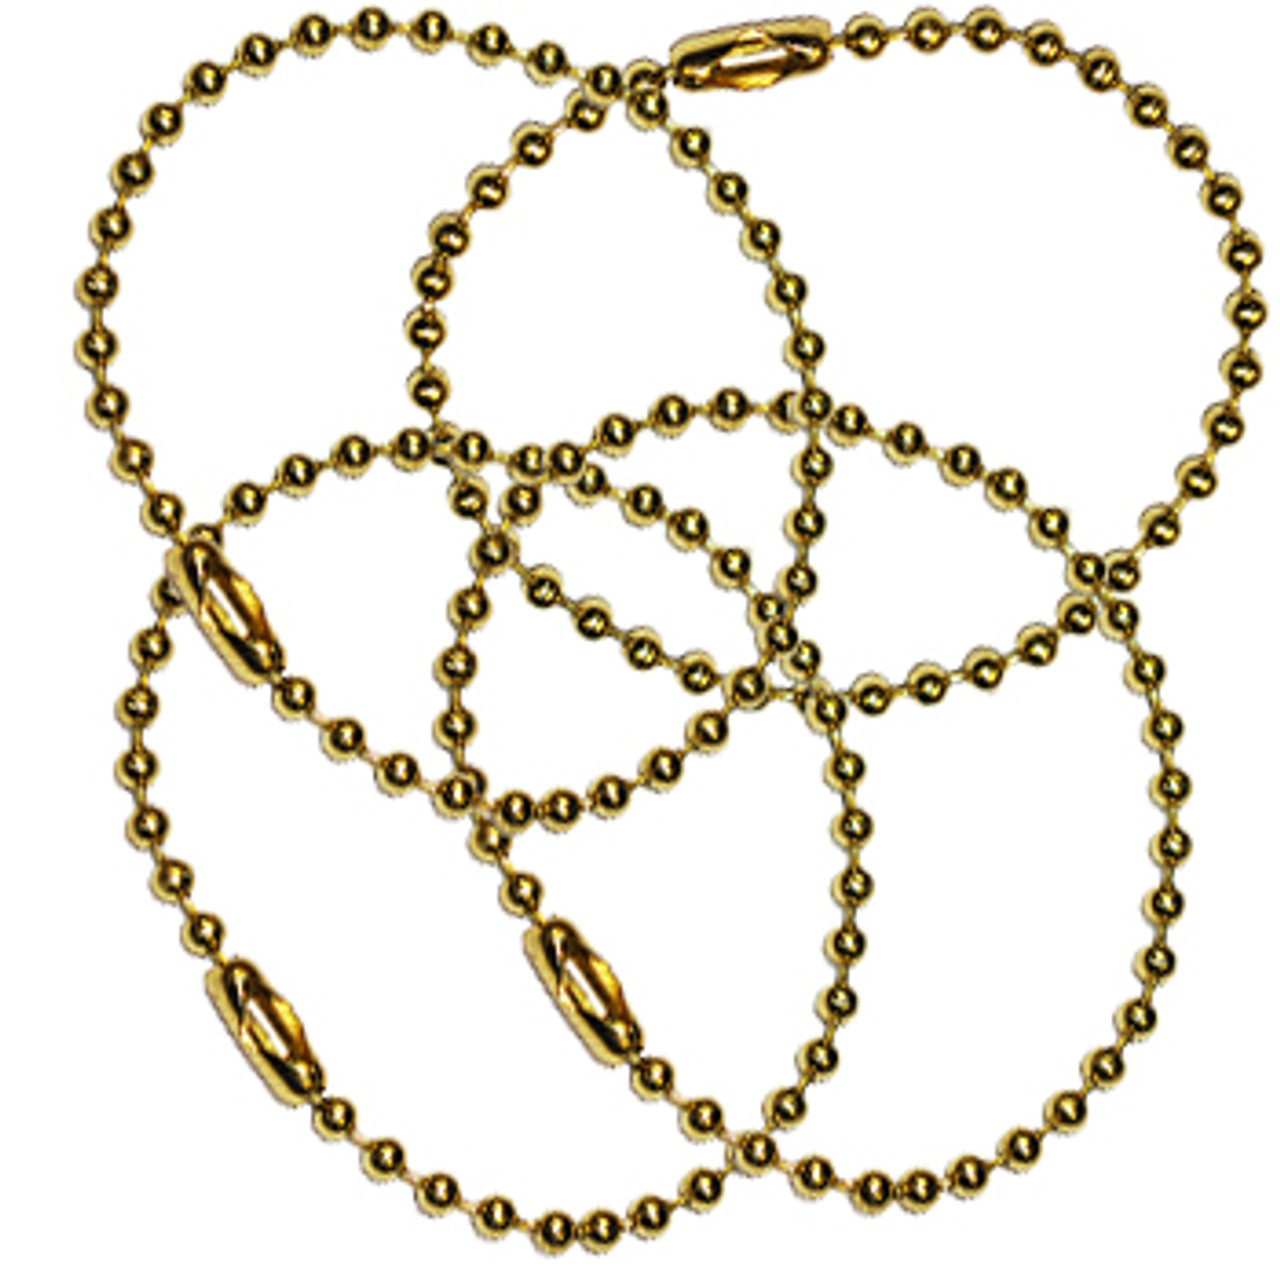 #3 Brass Plated Steel Key Chains - 6 inch Length